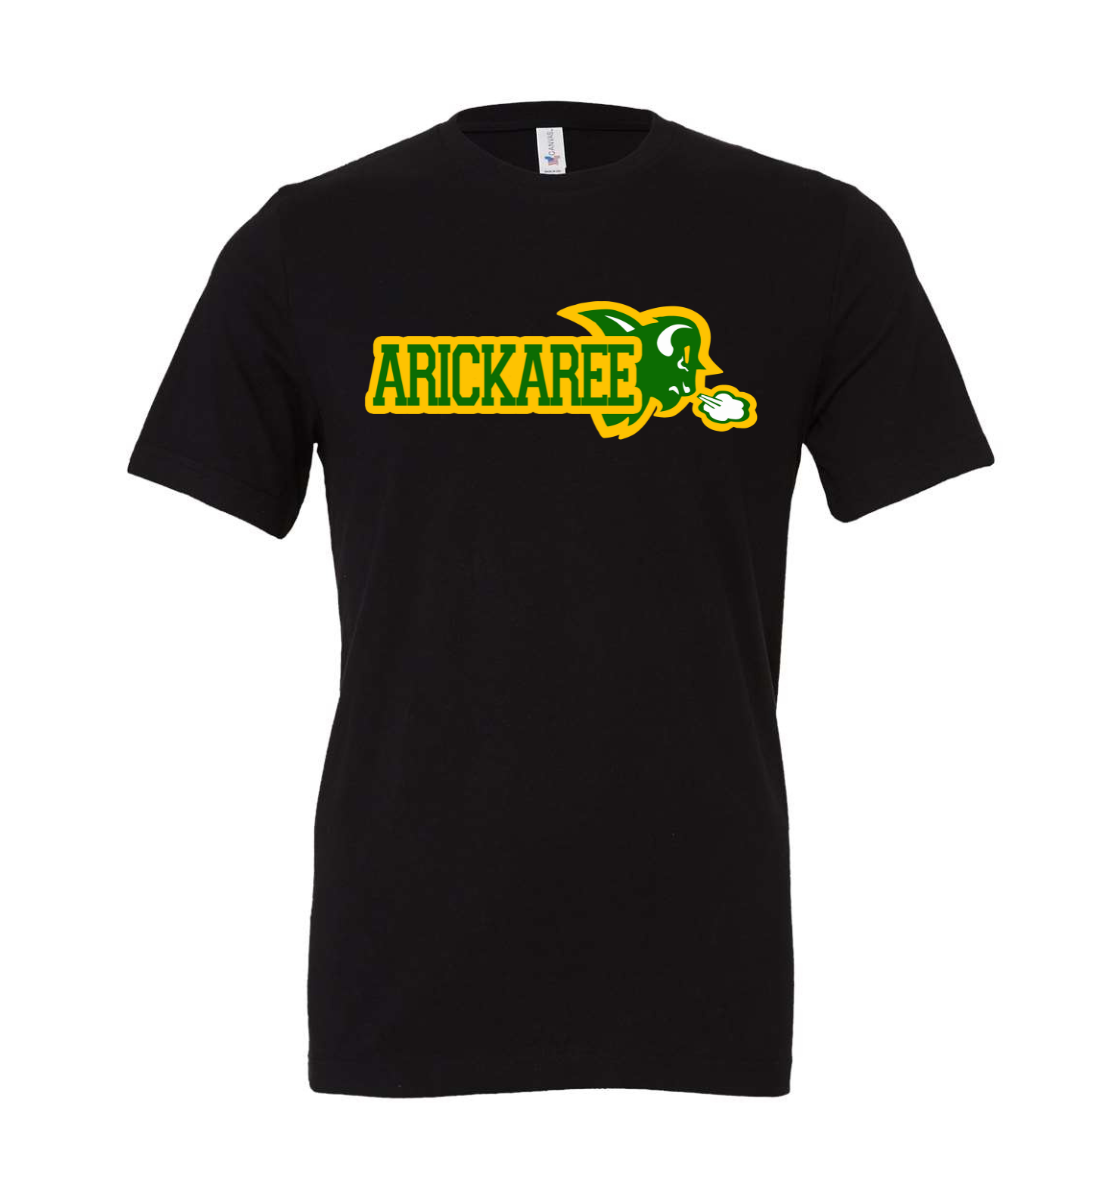 arickaree bison youth t-shirt: for young bison fans only!